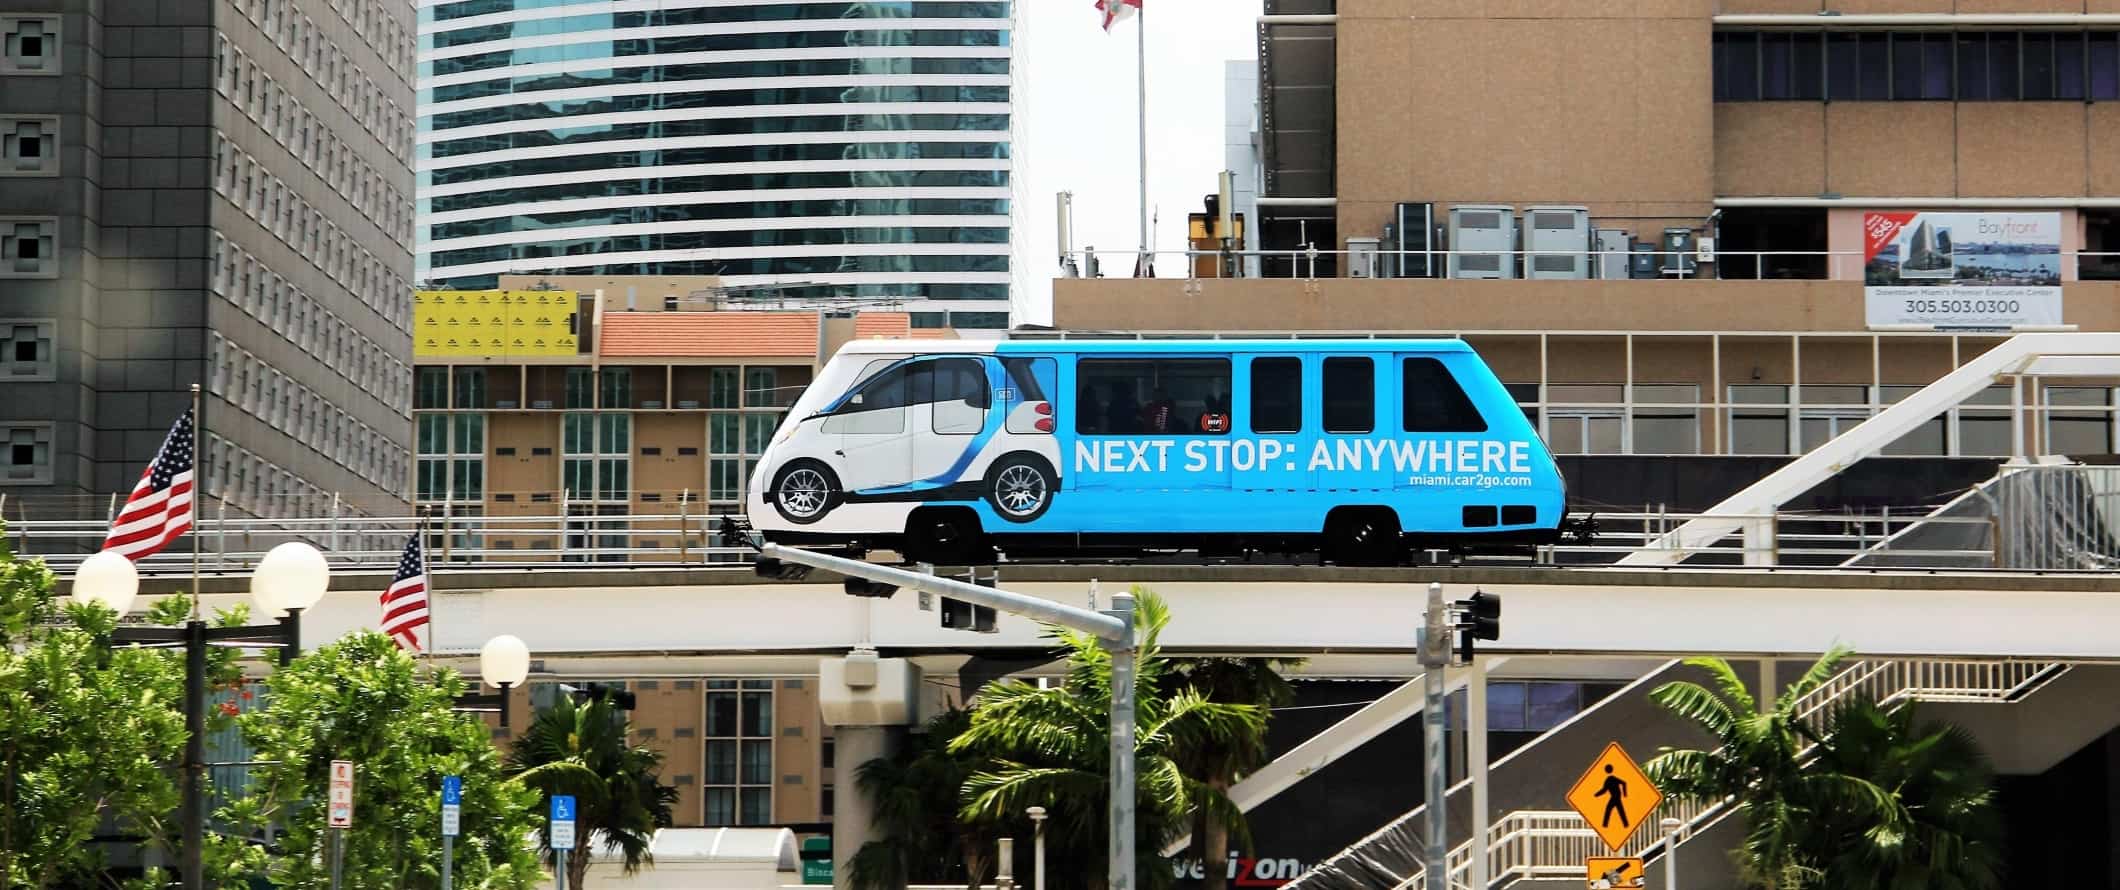 Blue metromover monorail surrounded by tall buildings in downtown Miami, Florida